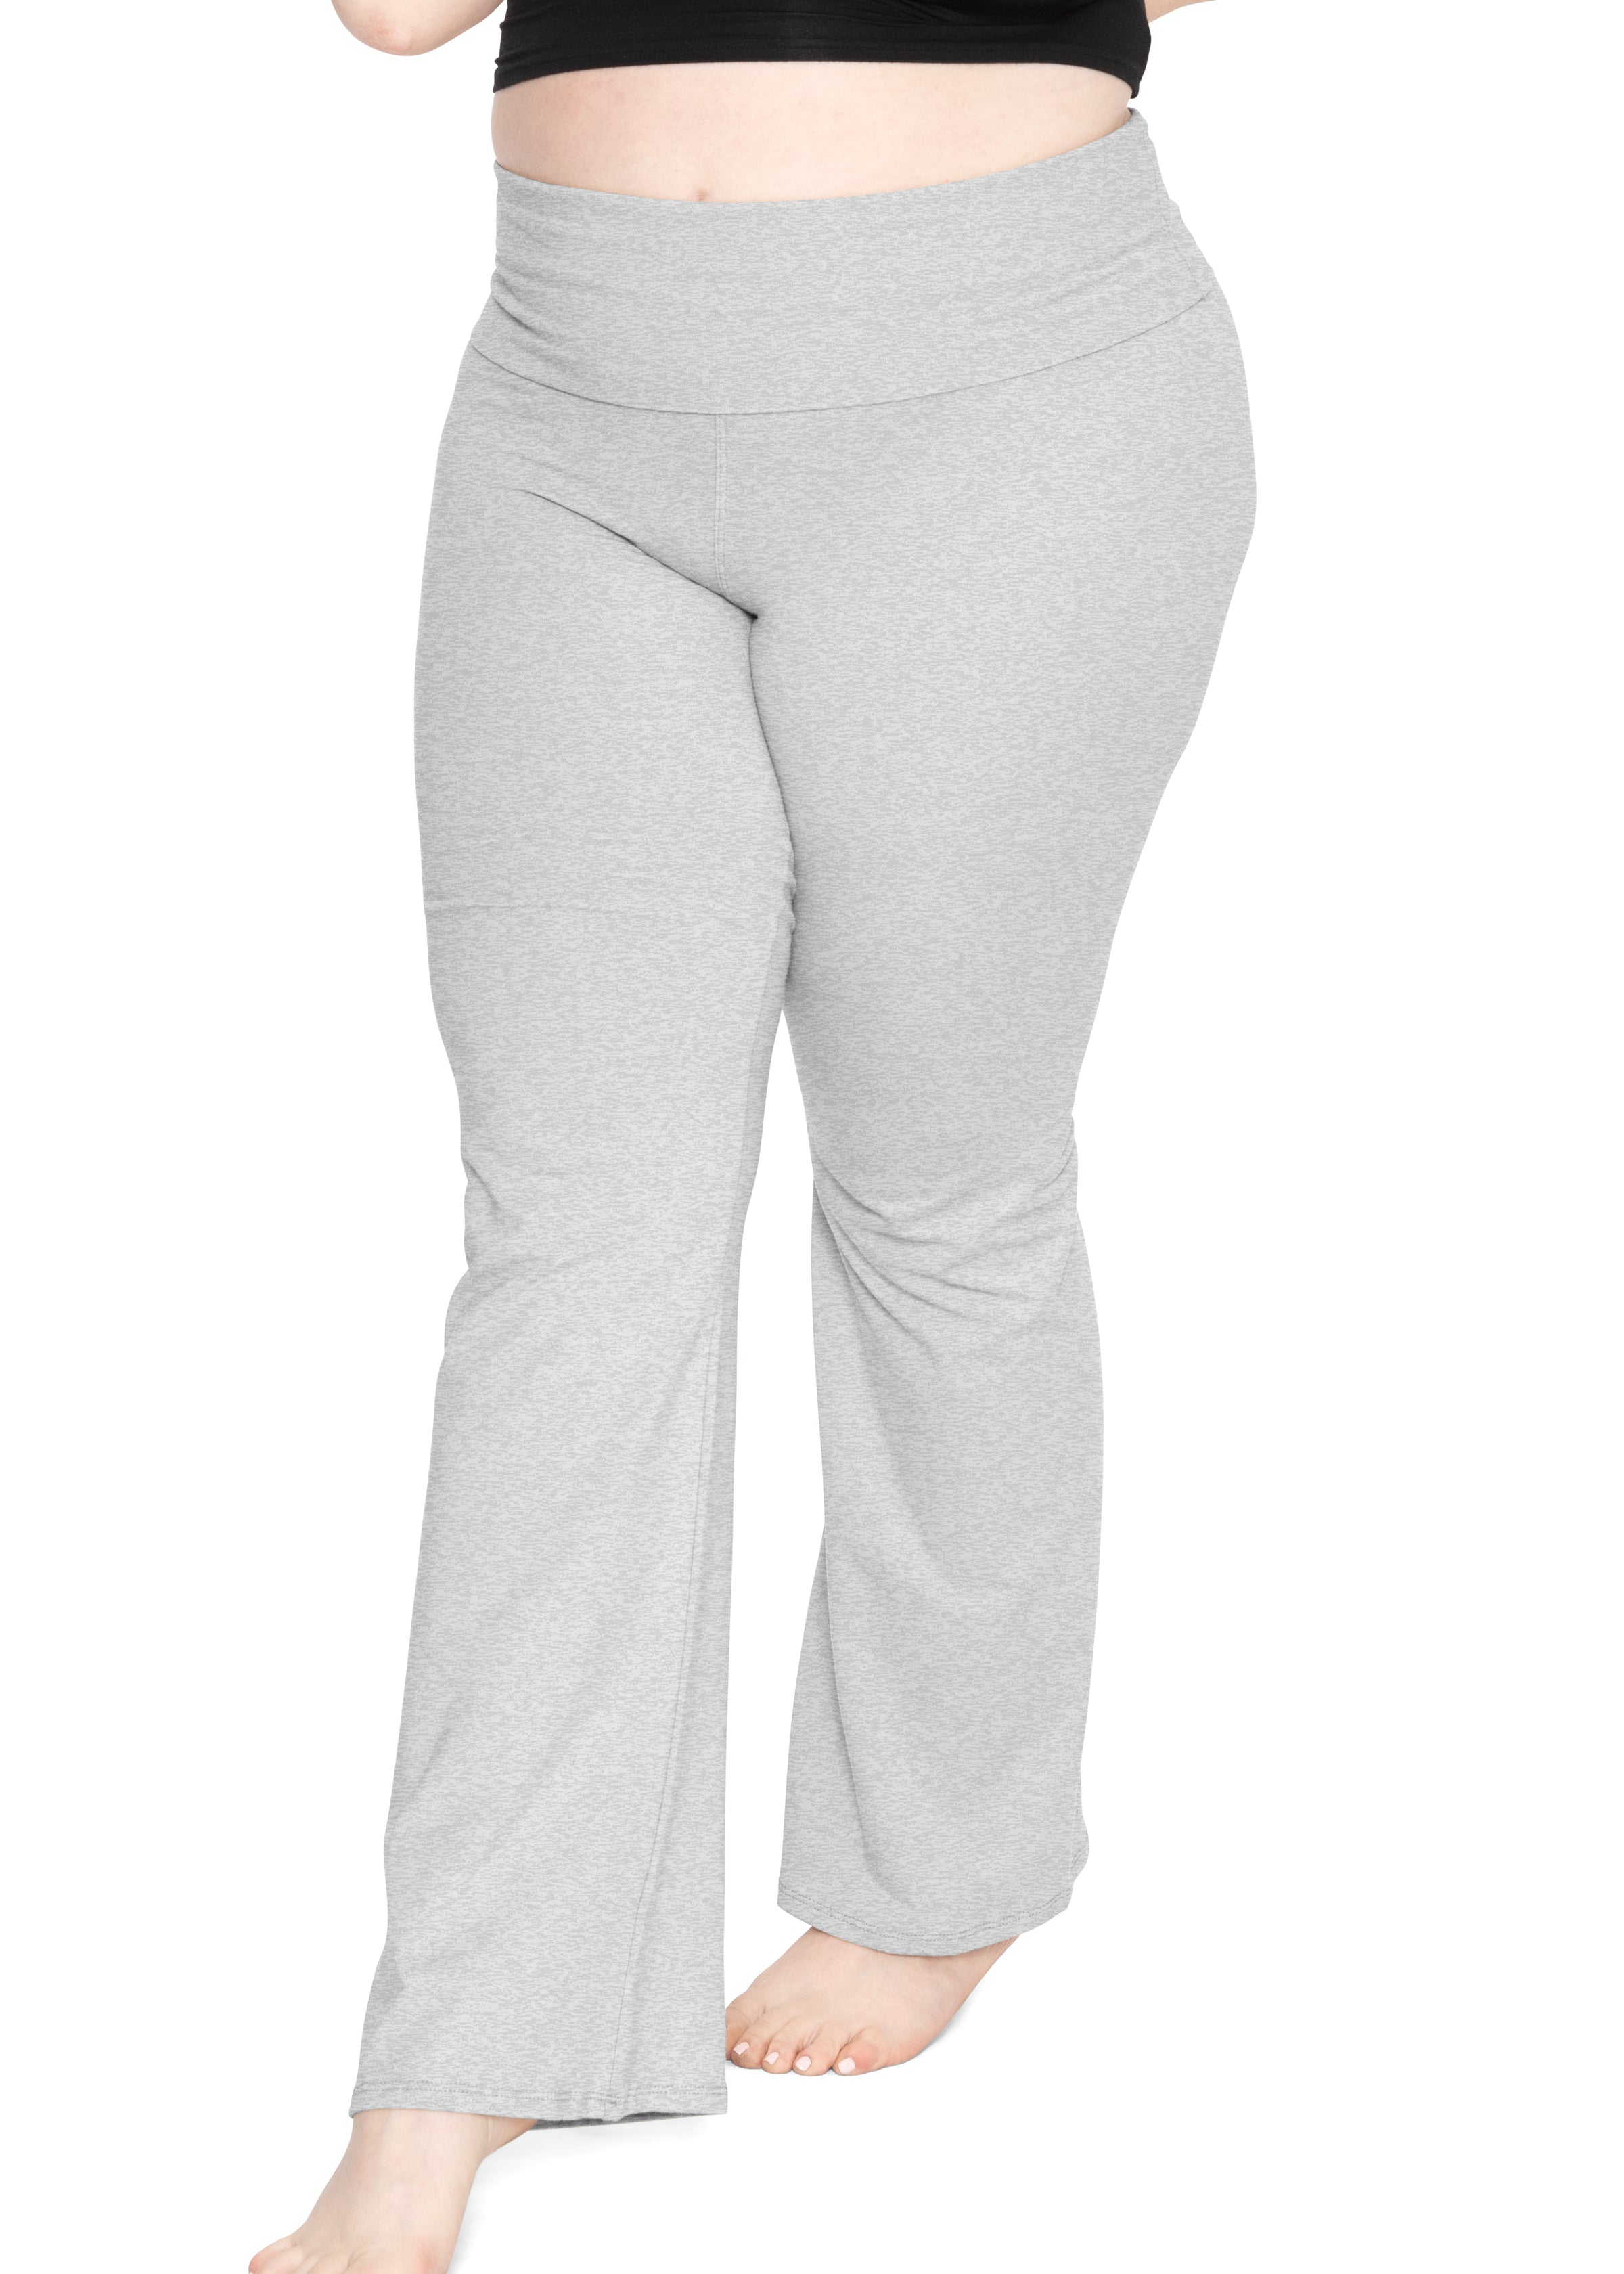  Womens Pants Size 16 Casual Women's Casual Solid Color Tether  Cotton Loose Yoga Cotton Trousers Plus Size Work Pants: Clothing, Shoes &  Jewelry